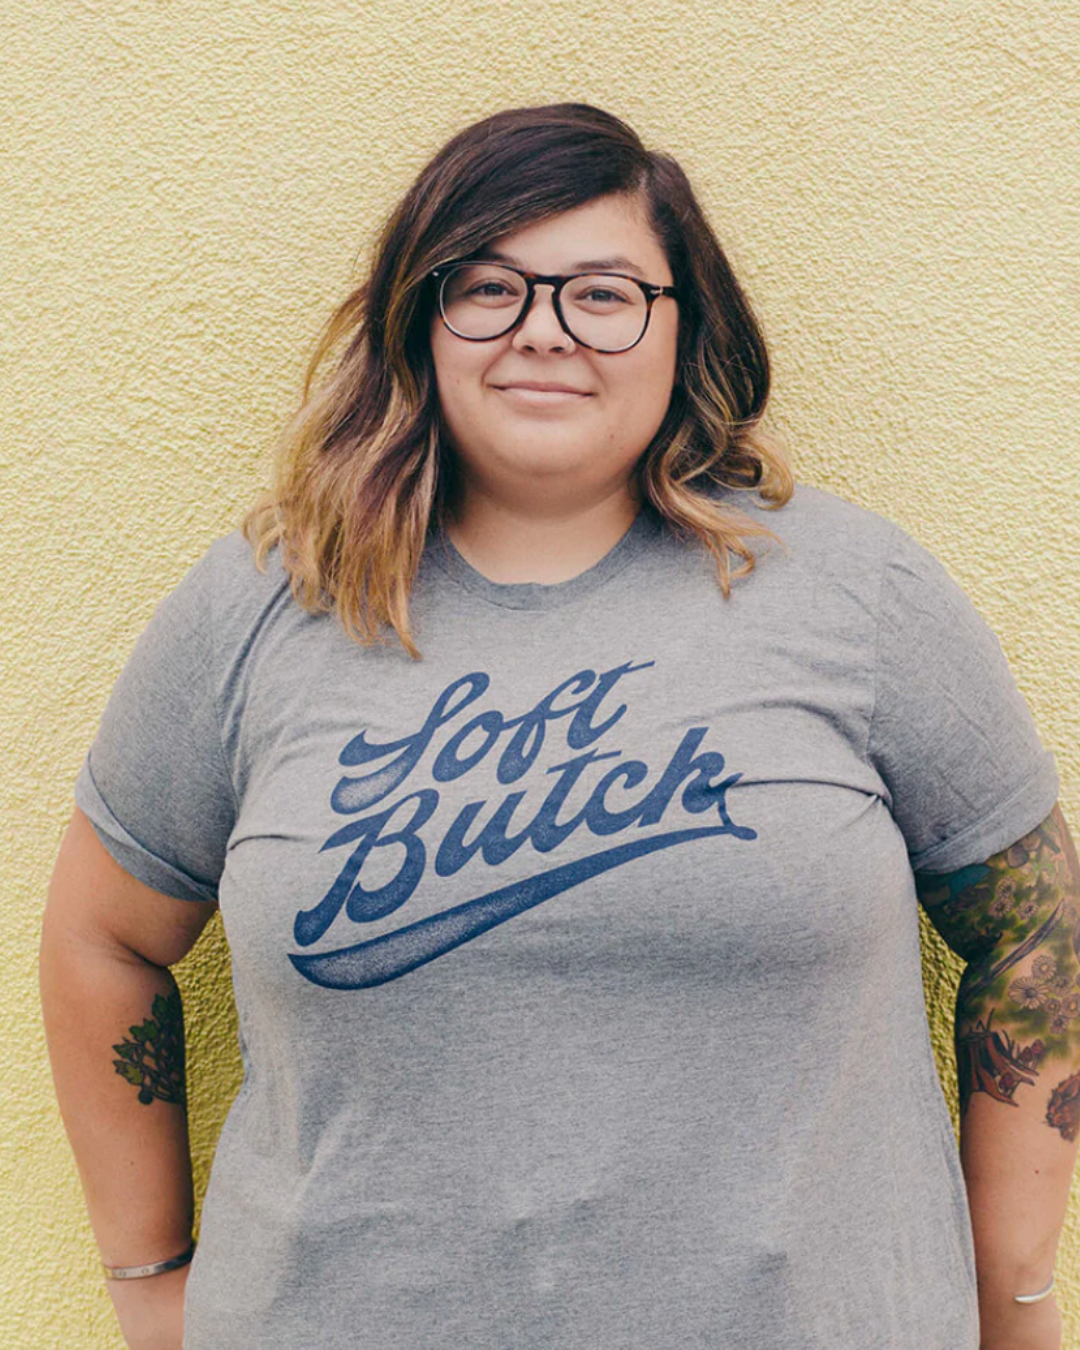 Model Chloe is wearing the Soft Butch Tee in size 2XL. She is 5'2" and her bra size is 38DD. The tee is grey a graphic type that says "Soft Butch" in navy blue retro sporty cursive.